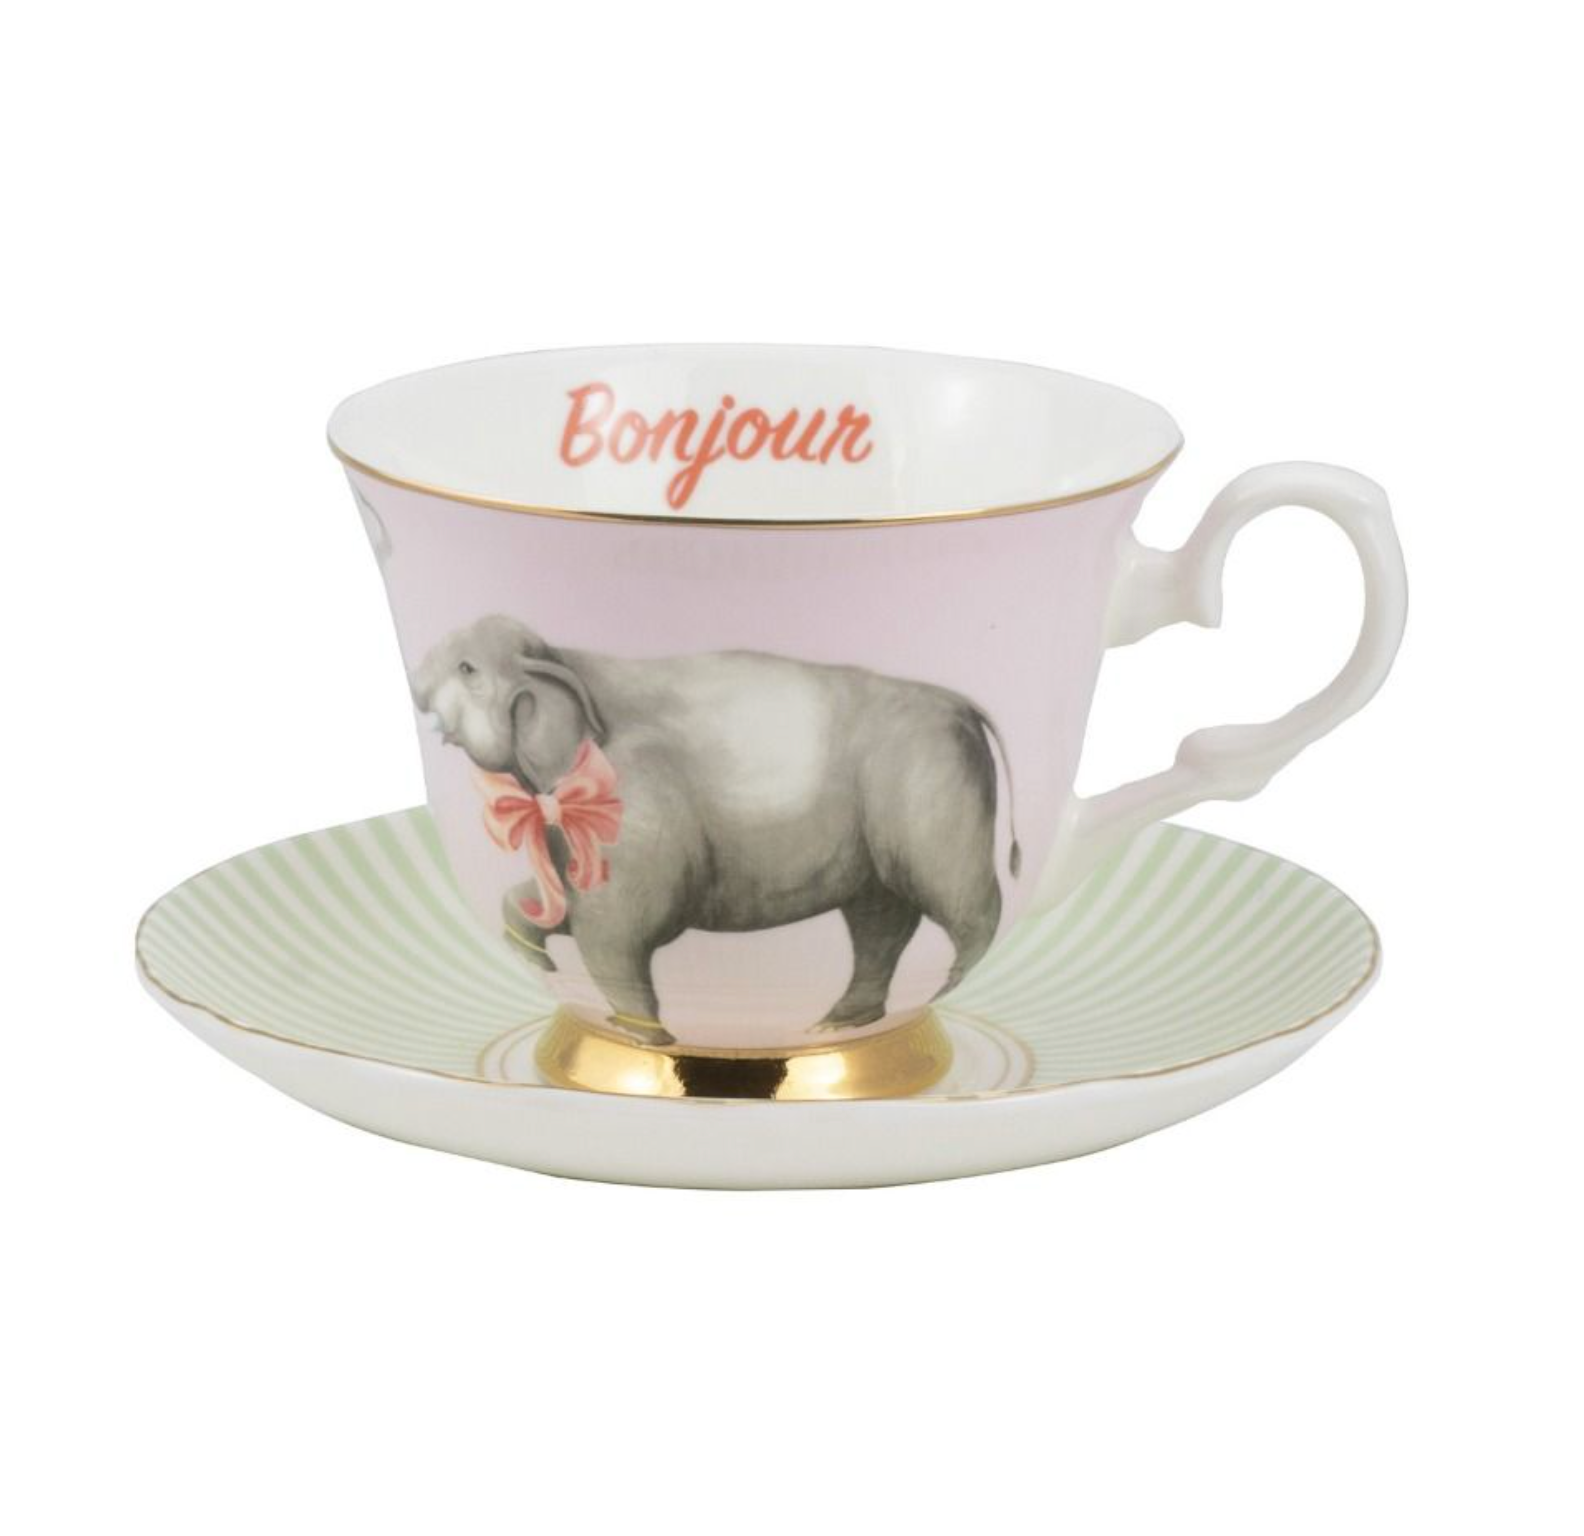 Cute Ceramic Elephant Tea Cup with Built in Tea Bag Holder - China